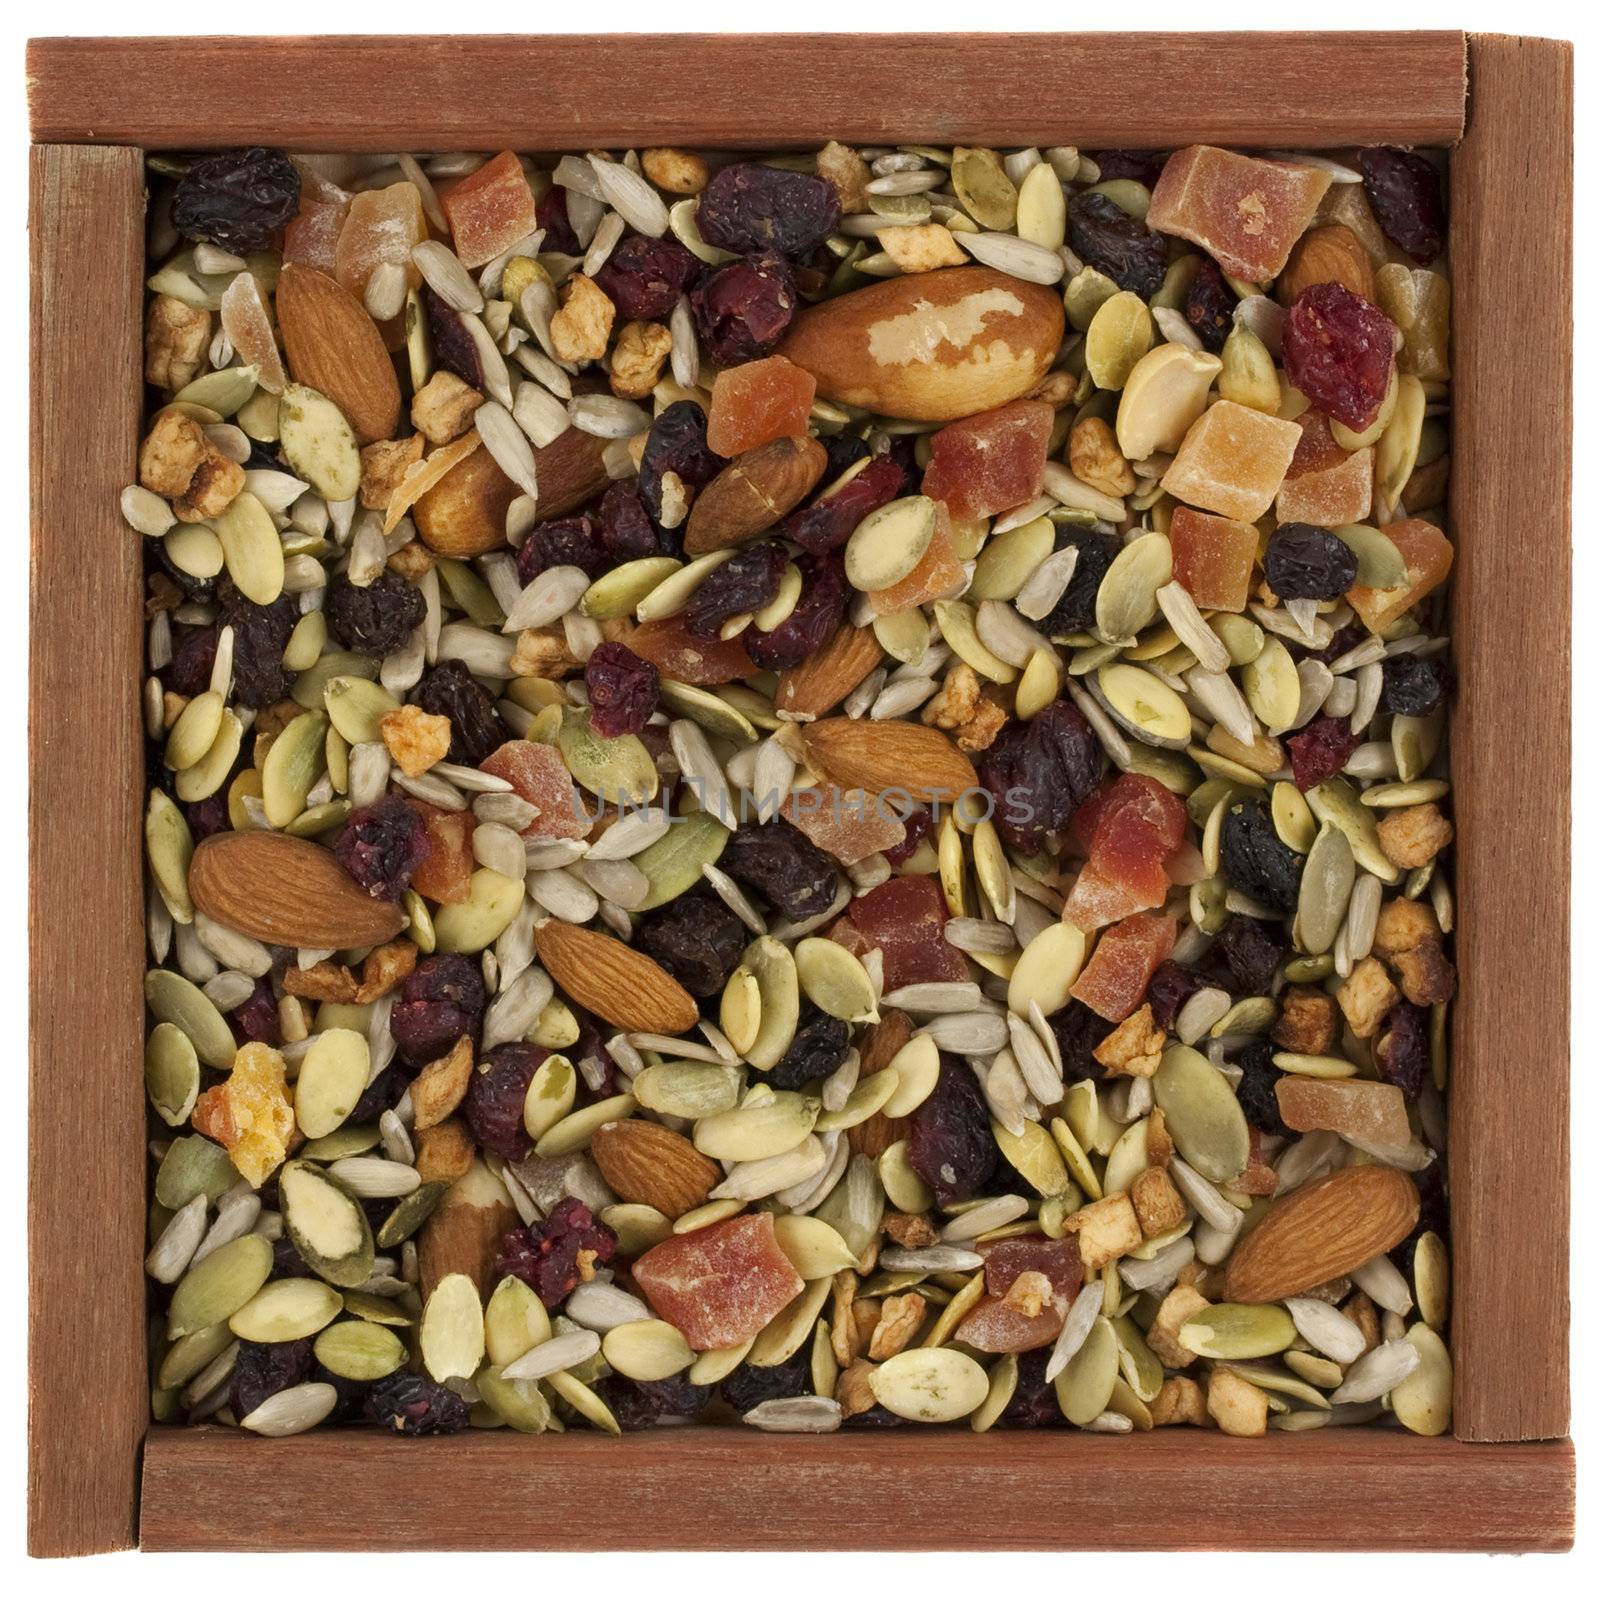 trail mix with nuts, berries and seeds in a wooden box by PixelsAway